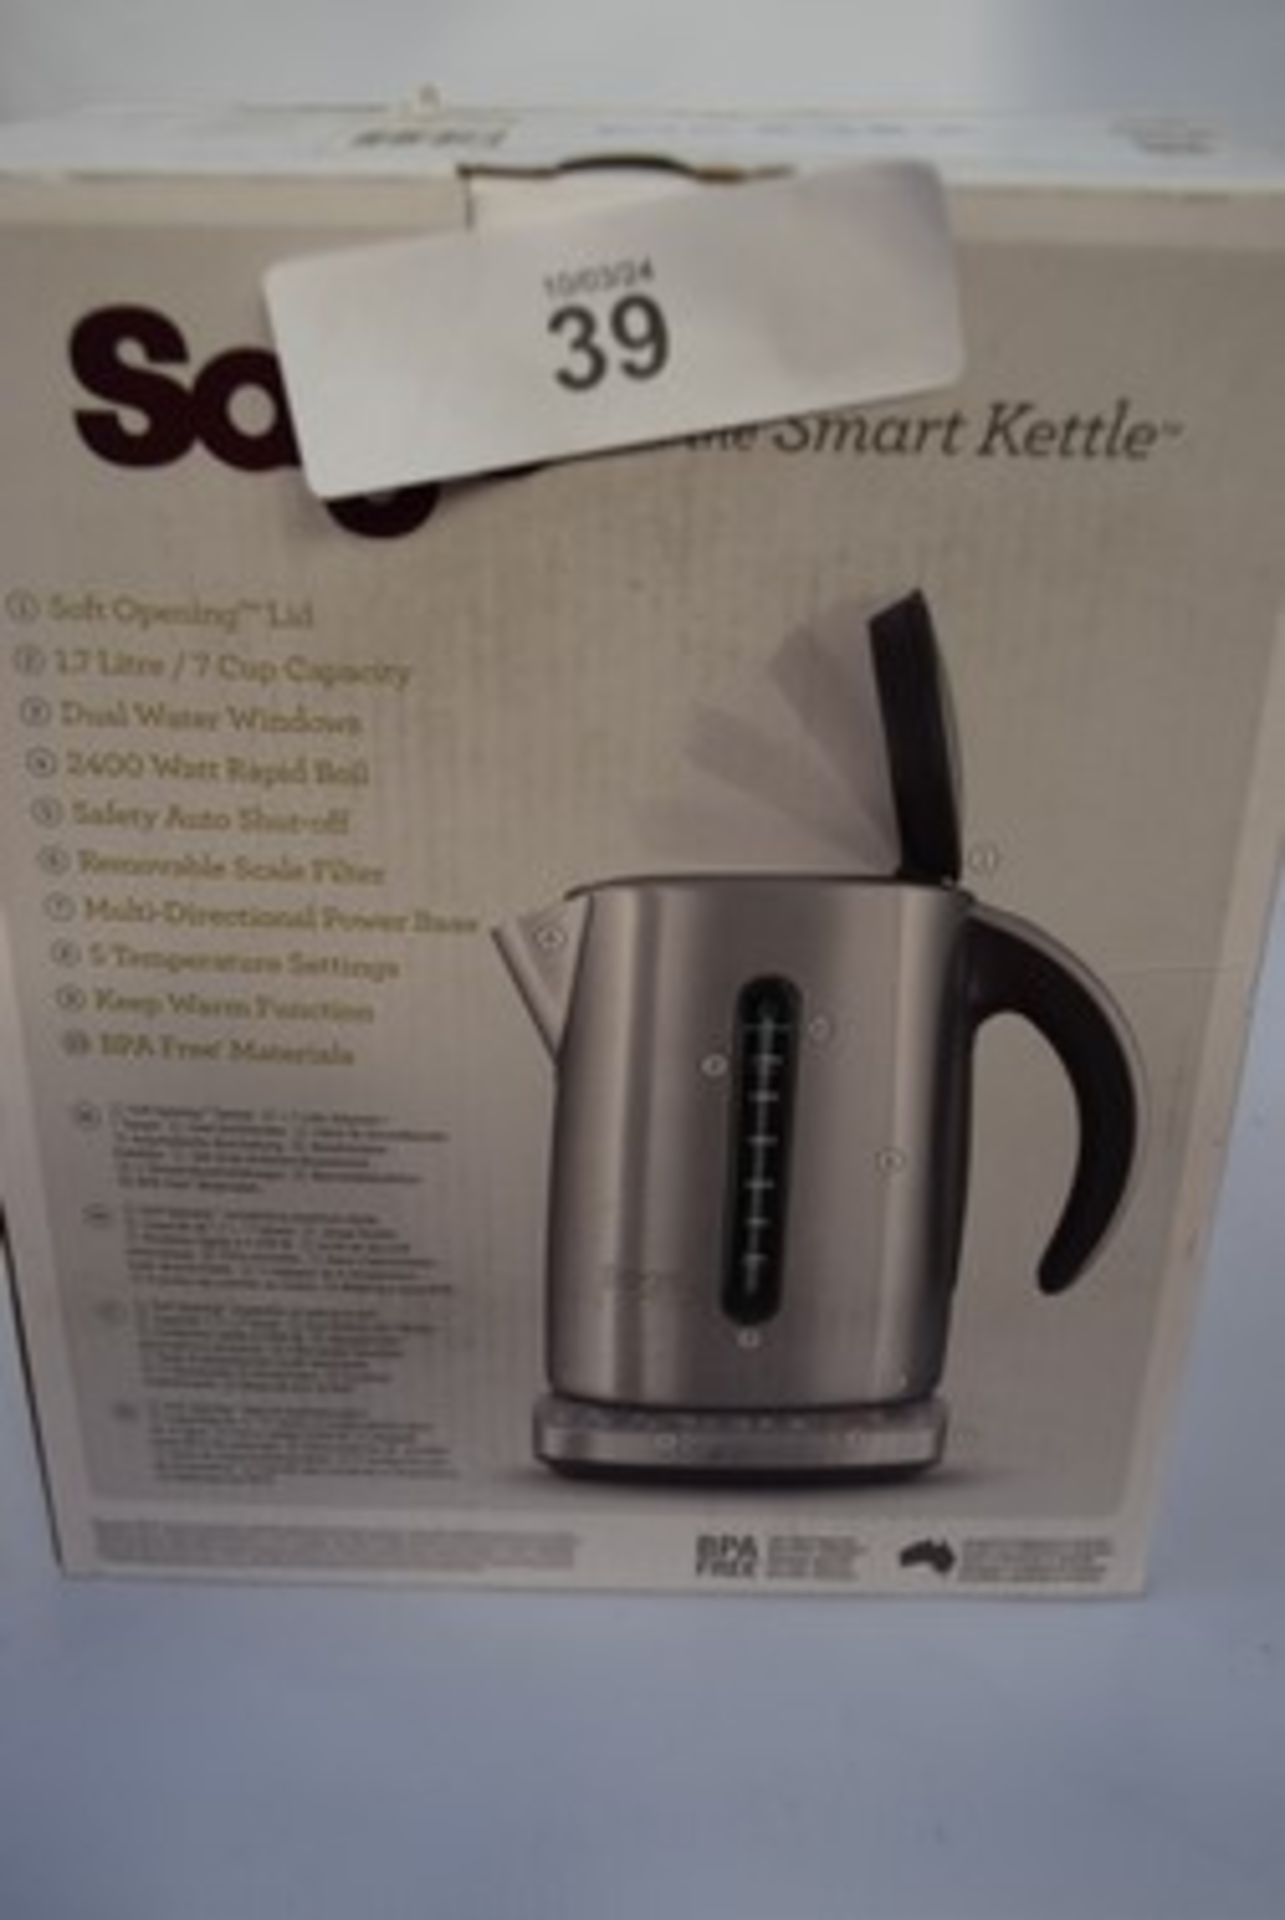 5 x electrical products, including Sage Smart kettle, Russell Hobbs cordless iron and Tower air - Image 5 of 6